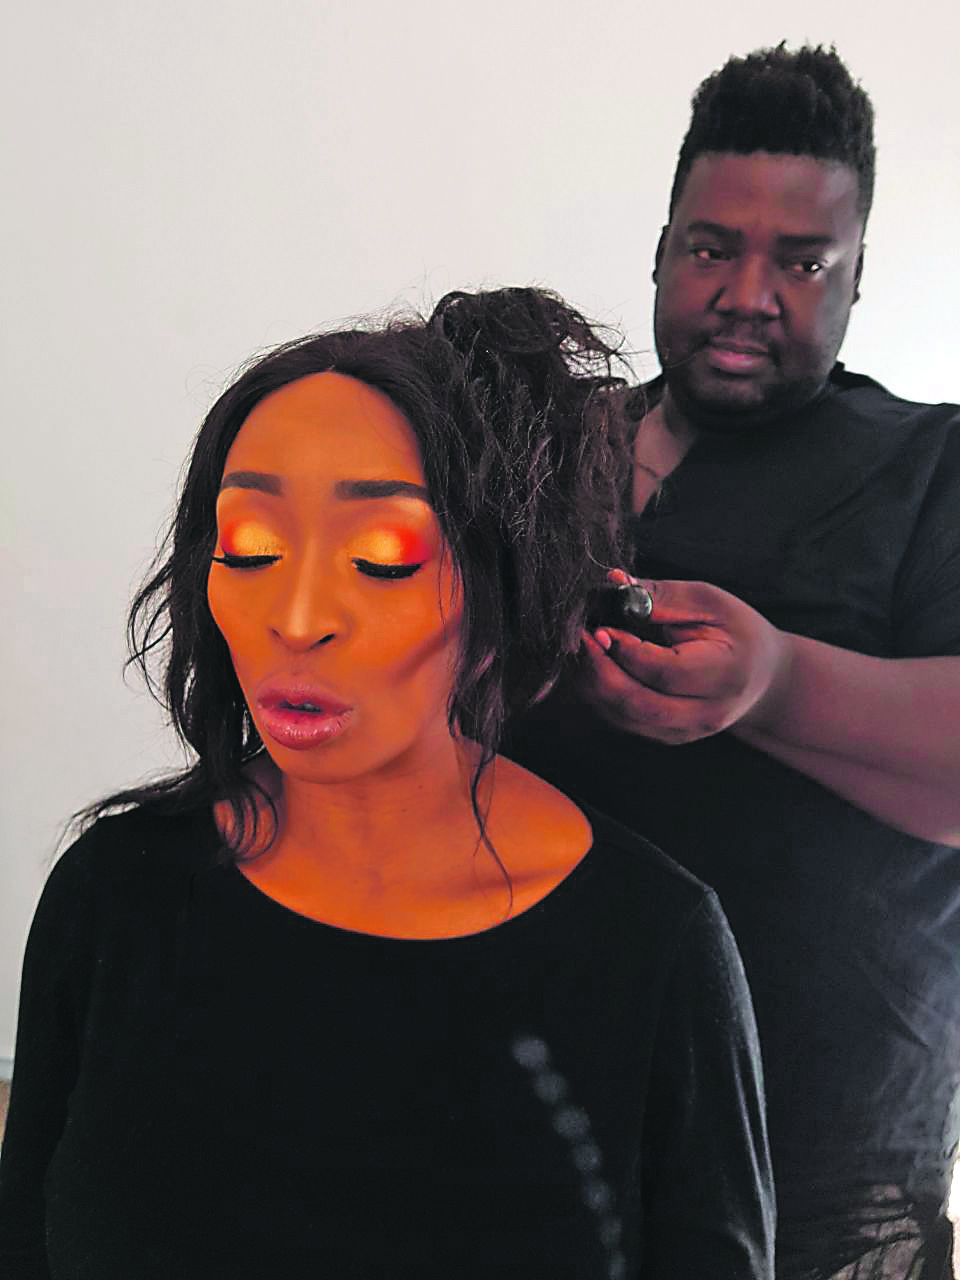 Kabelo Pusoe (right), who worked on presenter Khabonina Qubeka’s hair, claims he is owed R2 000.